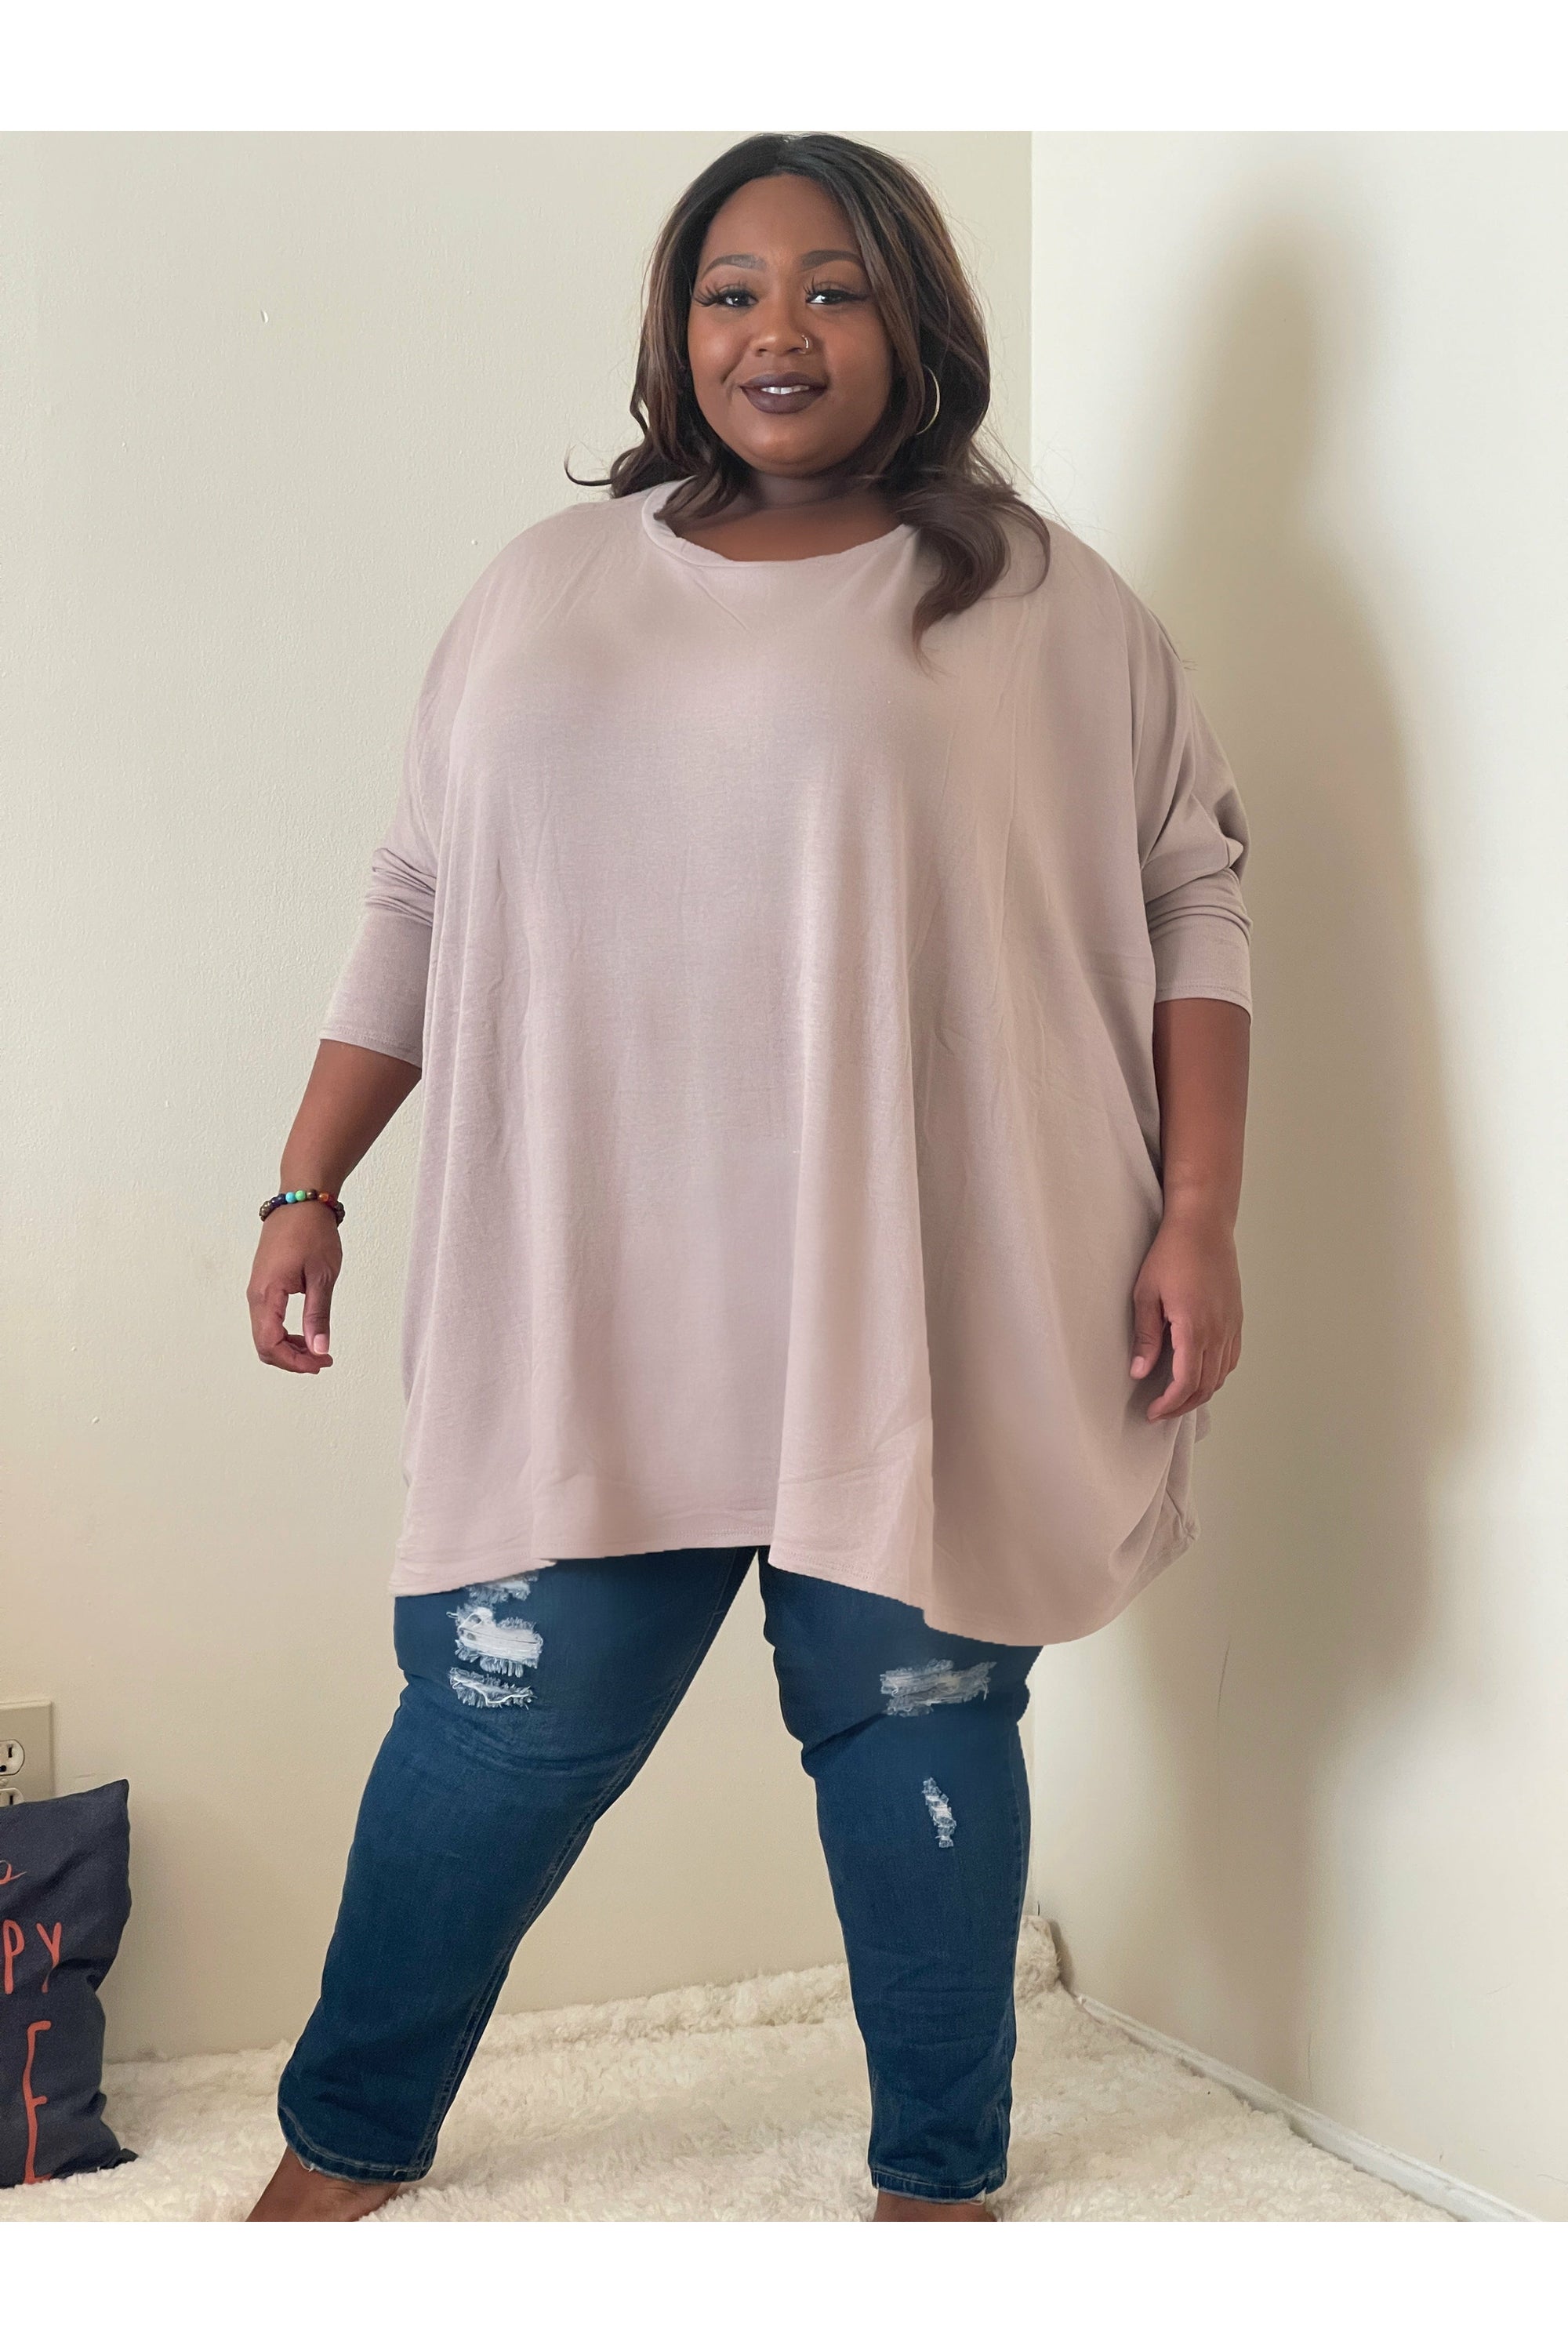 Warm It Up Plus Size Sweater - Nore's Fashion